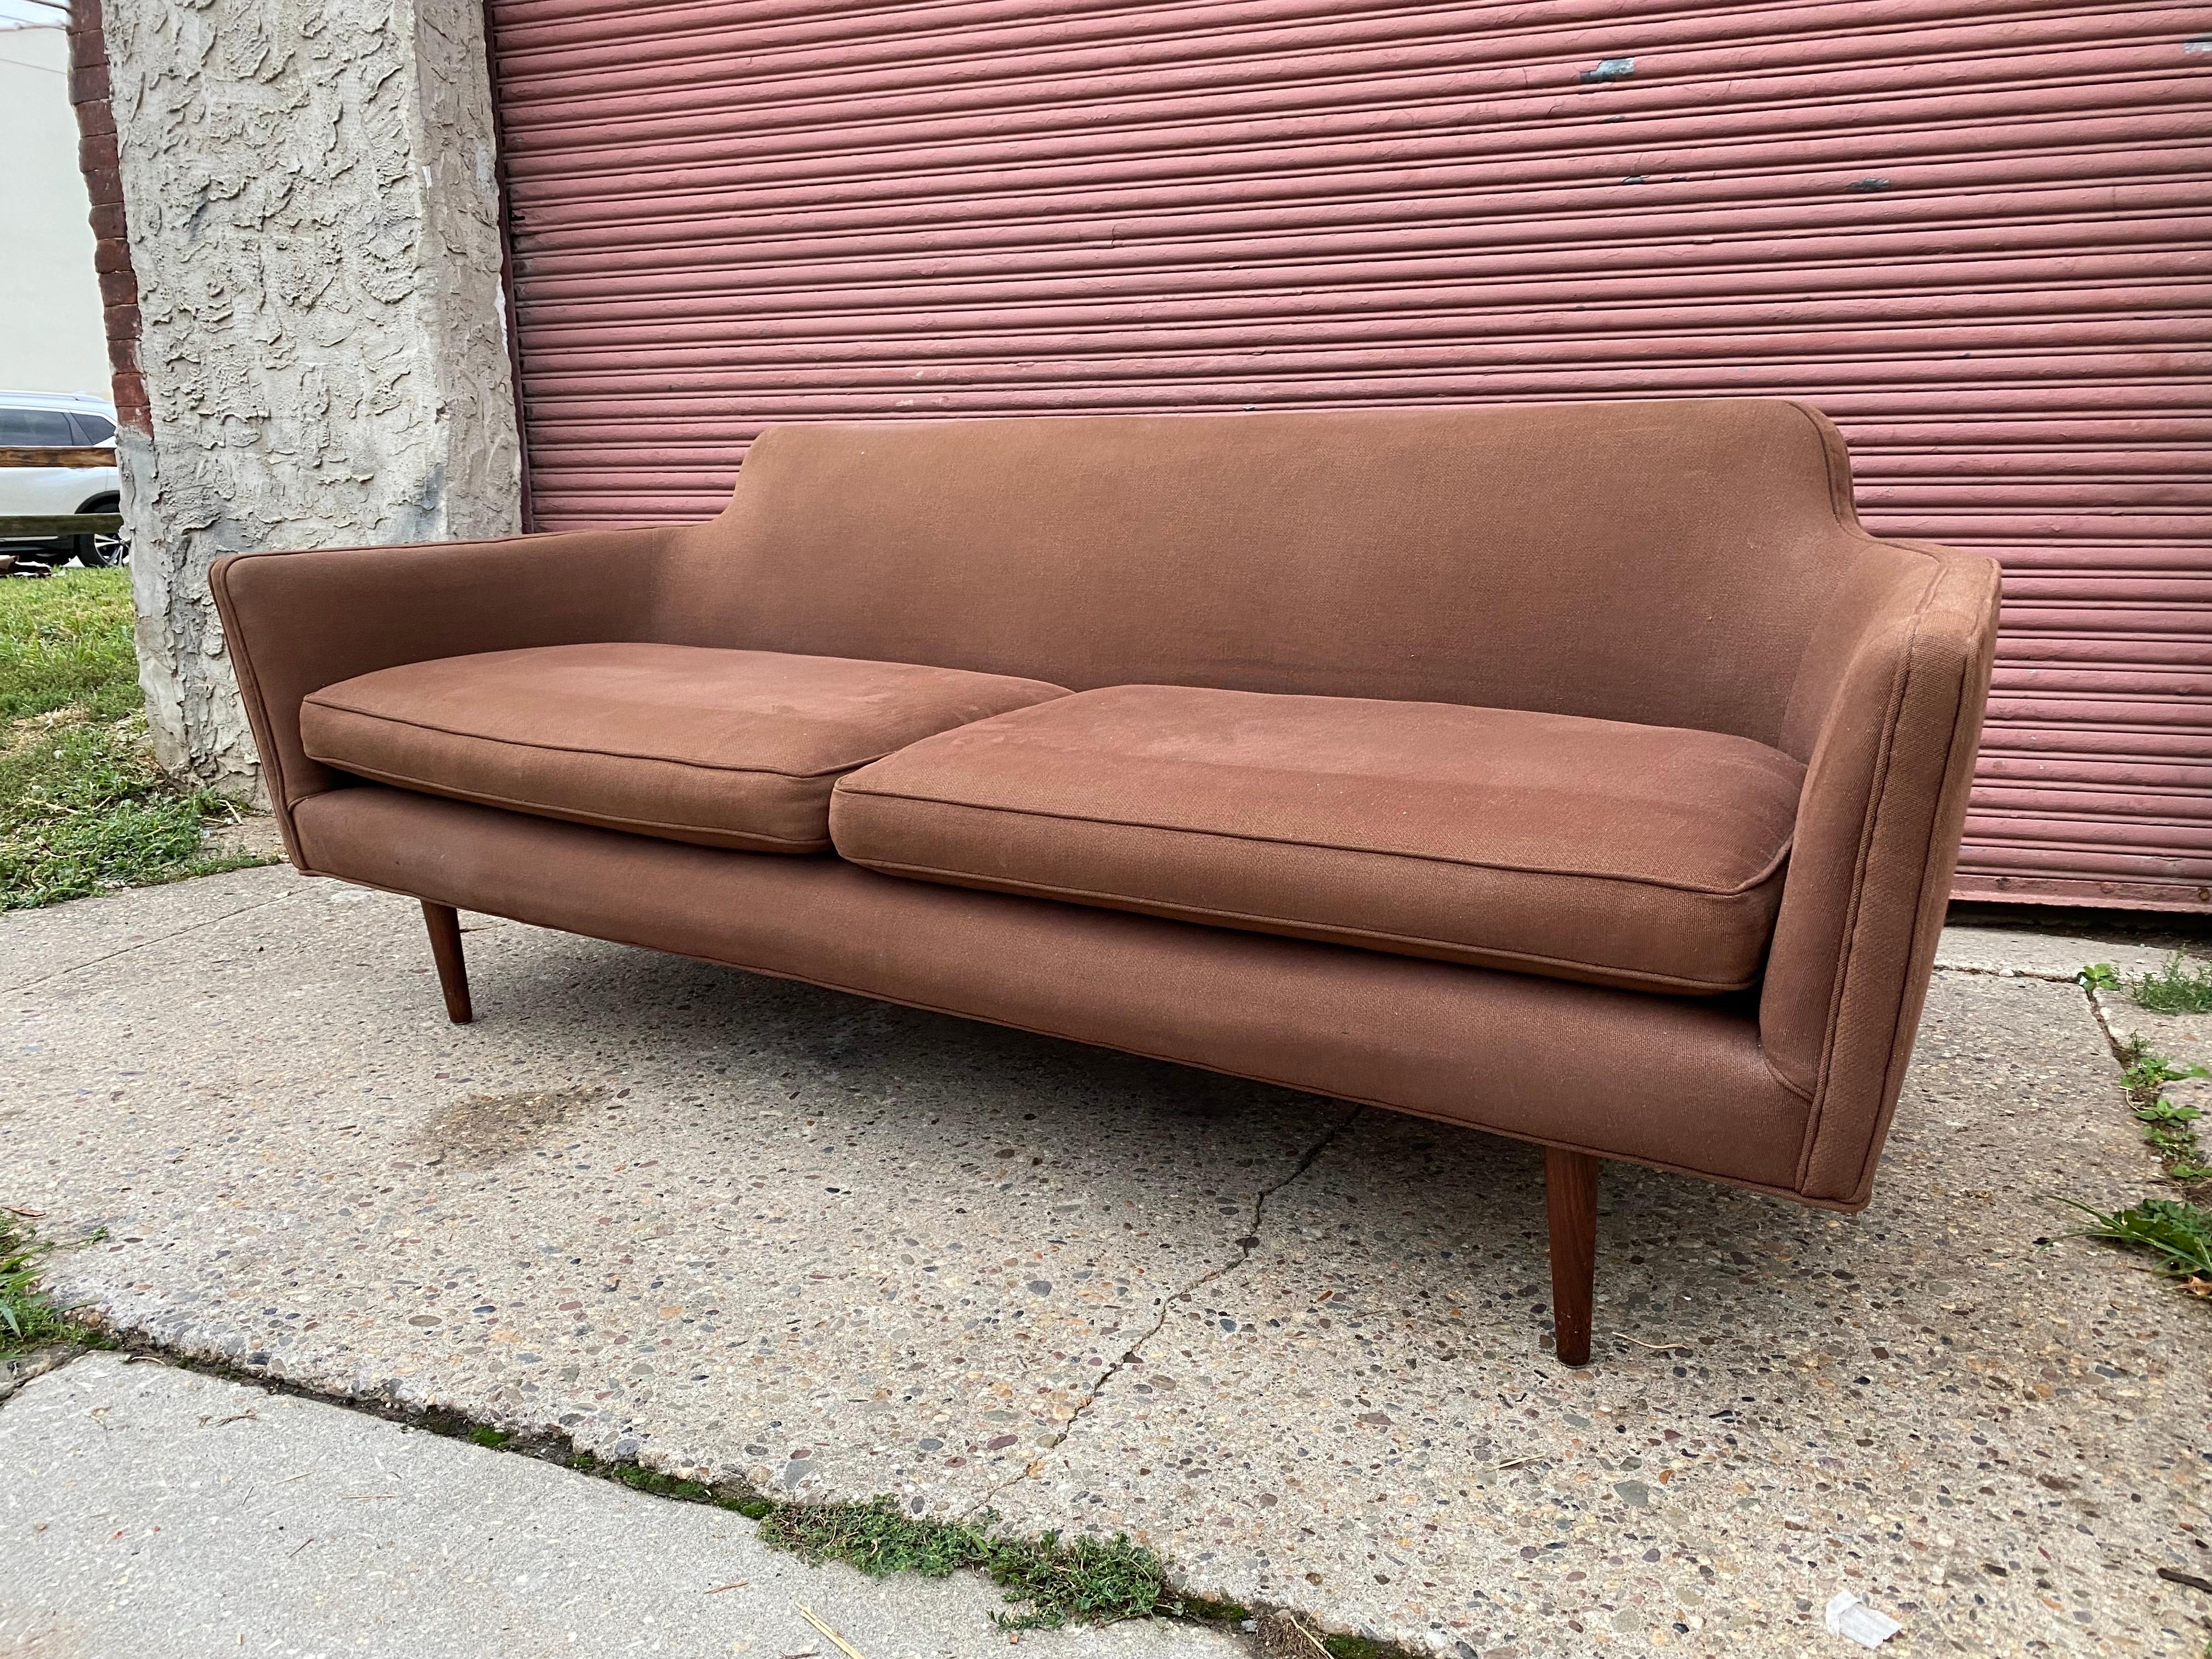 Sleek stylish probably Danish sofa, although have found attributed to Adrian Pearsall?! Have never seen any of his work with Rosewood legs. Amazing scale and size! Sofa measures just 81